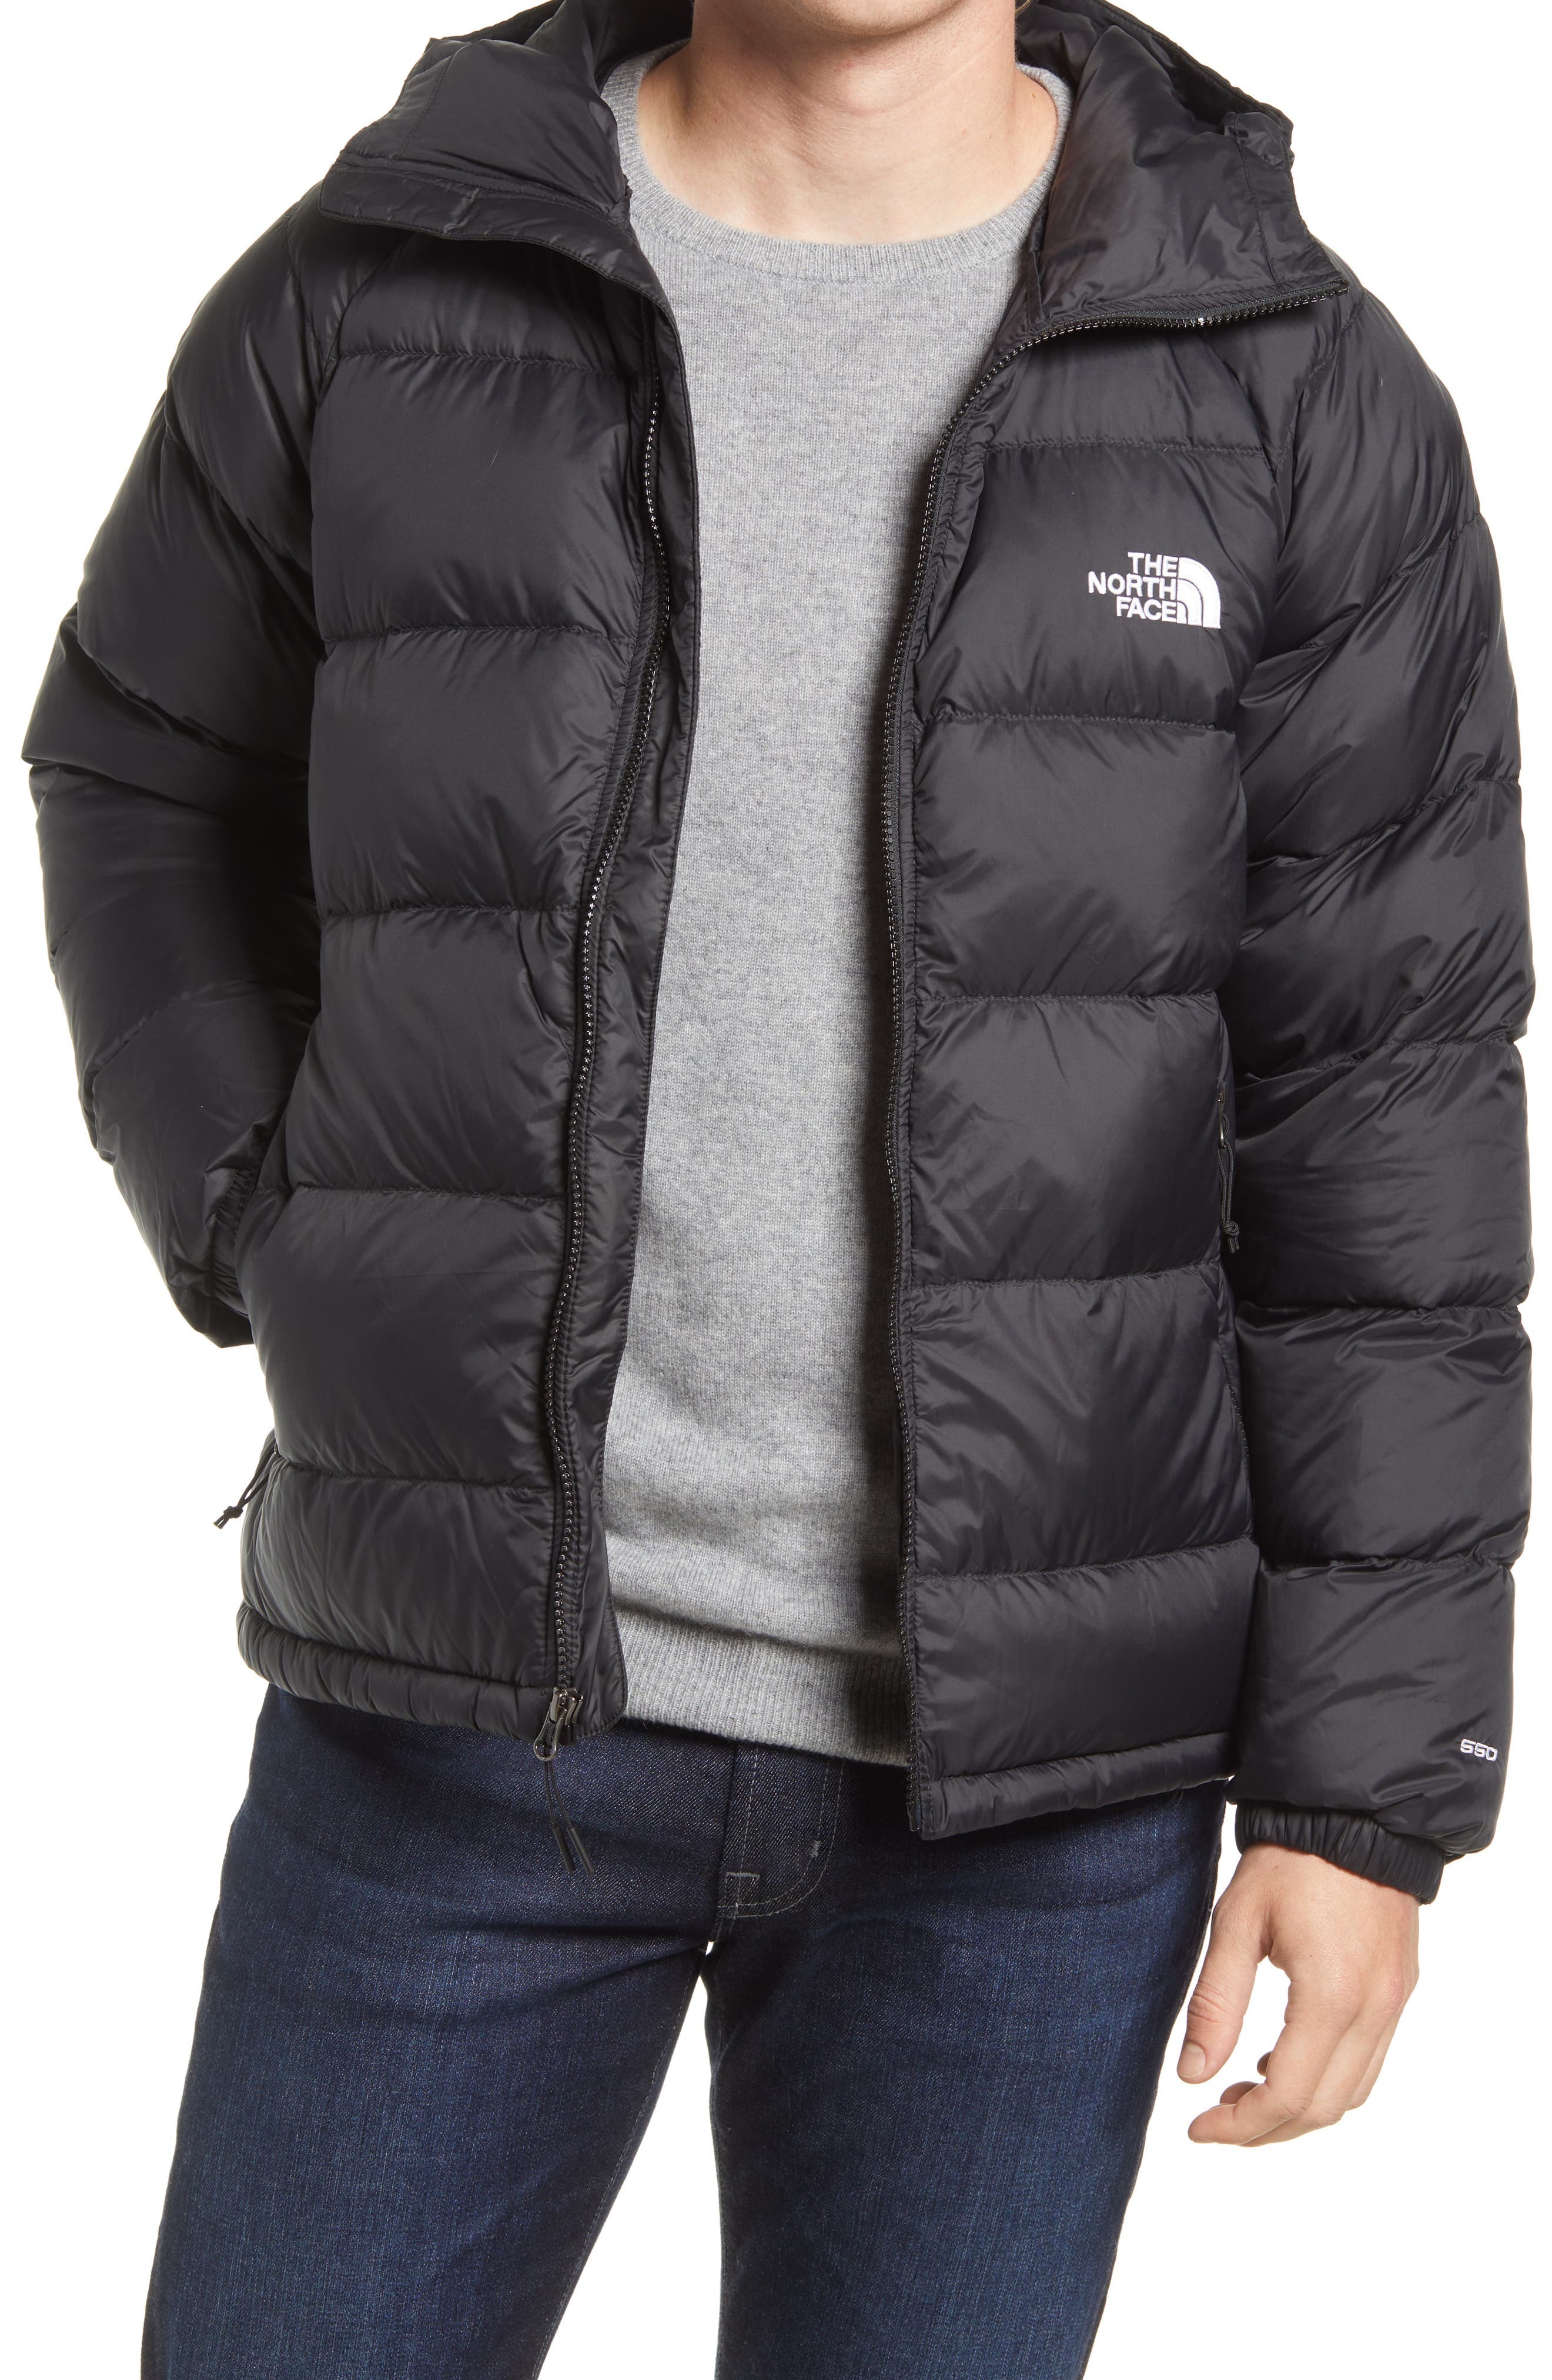 The North Face Hyalite 550 Fill Power Down Jacket, $250 | Nordstrom ...